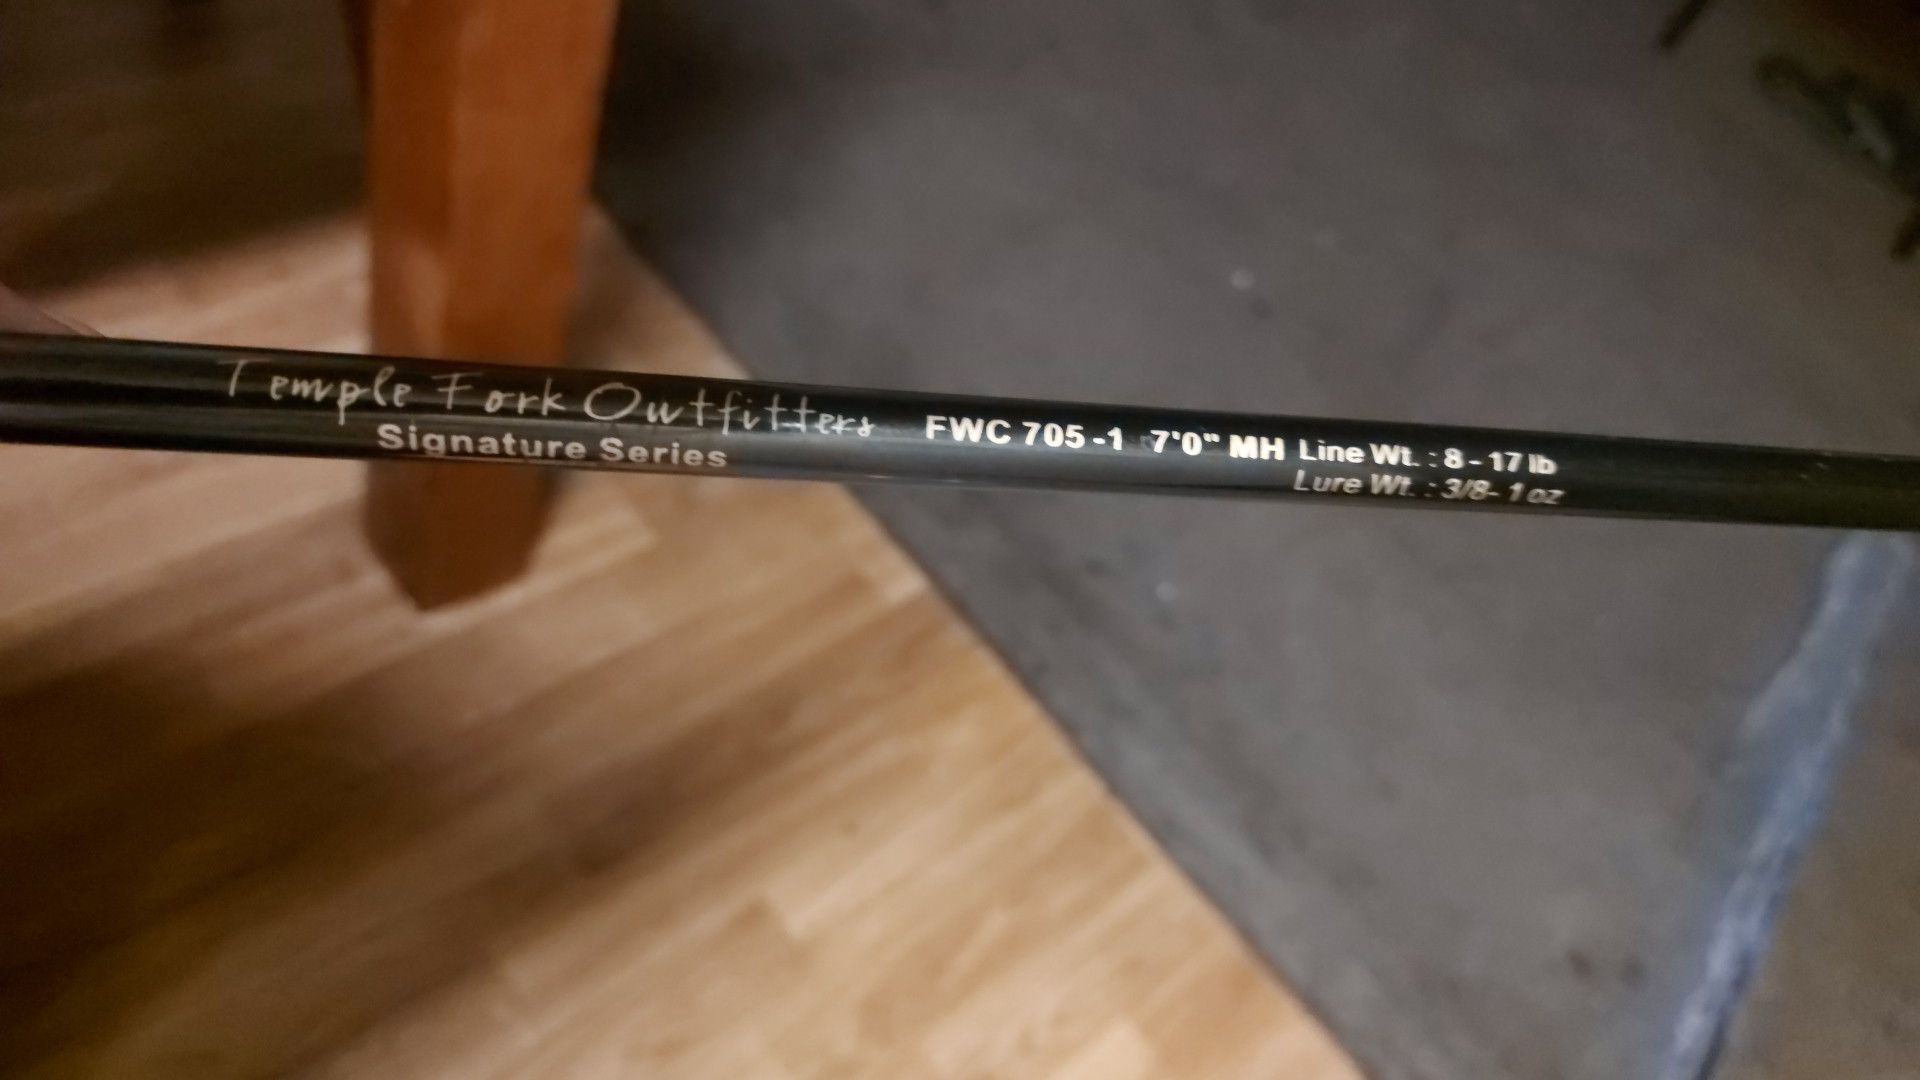 Temple Fork Outfitters (T.F.O.) Casting rod, fishing pole. Baitcast